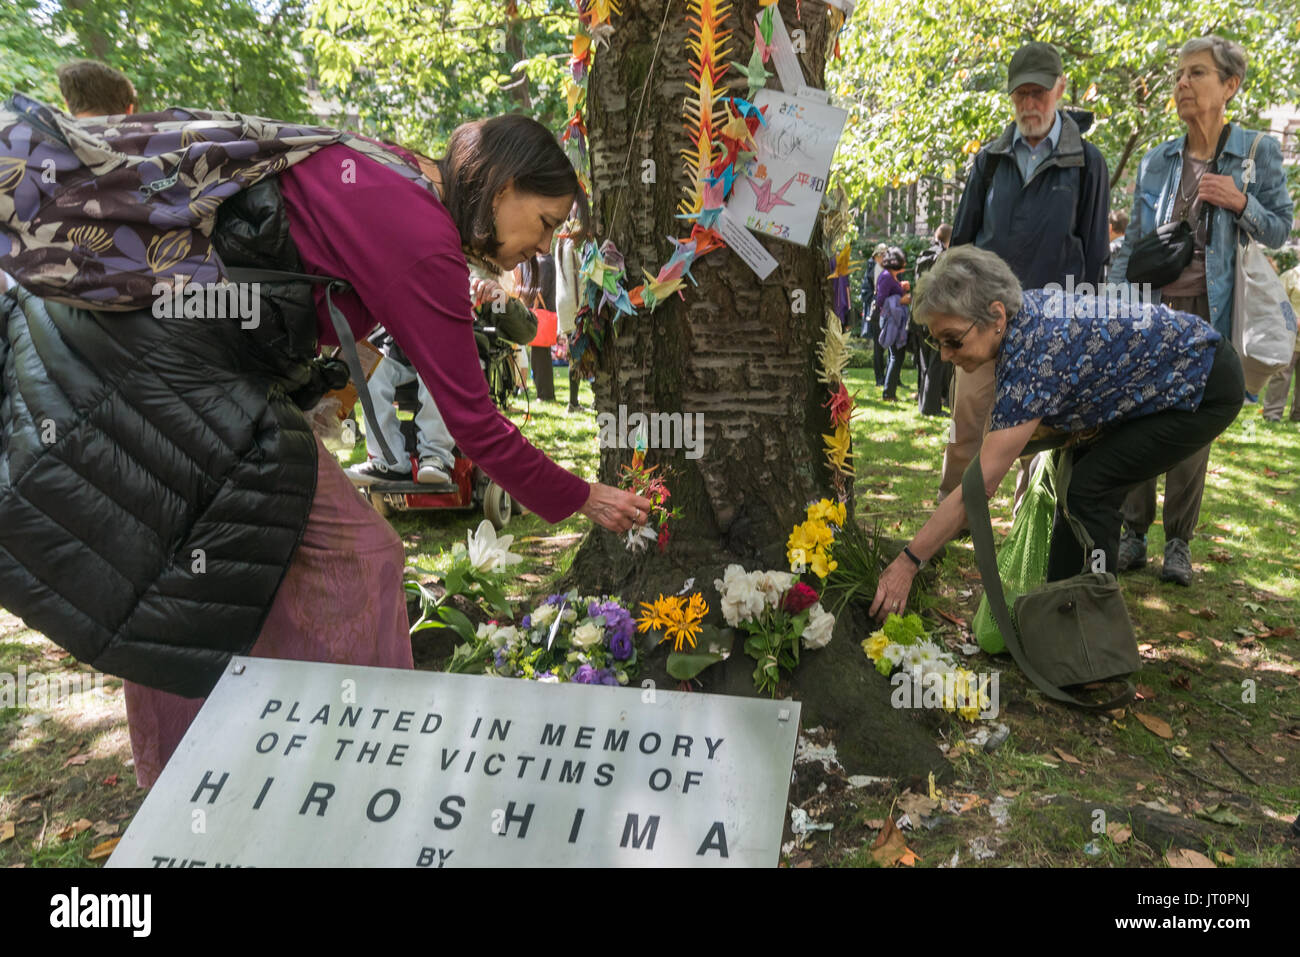 London, UK. 6th Aug, 2017. London, UK. 6th August 2017. Peoople lay flowers at the Hiroshima Cherry Tree at the London CND ceremony in memory of the victims, past and present on the 72nd anniversary of the dropping of the atomic bomb on Hiroshima and the second atomic bomb dropped on Nagasaki three days later. Peter Marshall ImagesLive Credit: Peter Marshall/ImagesLive/ZUMA Wire/Alamy Live News Stock Photo